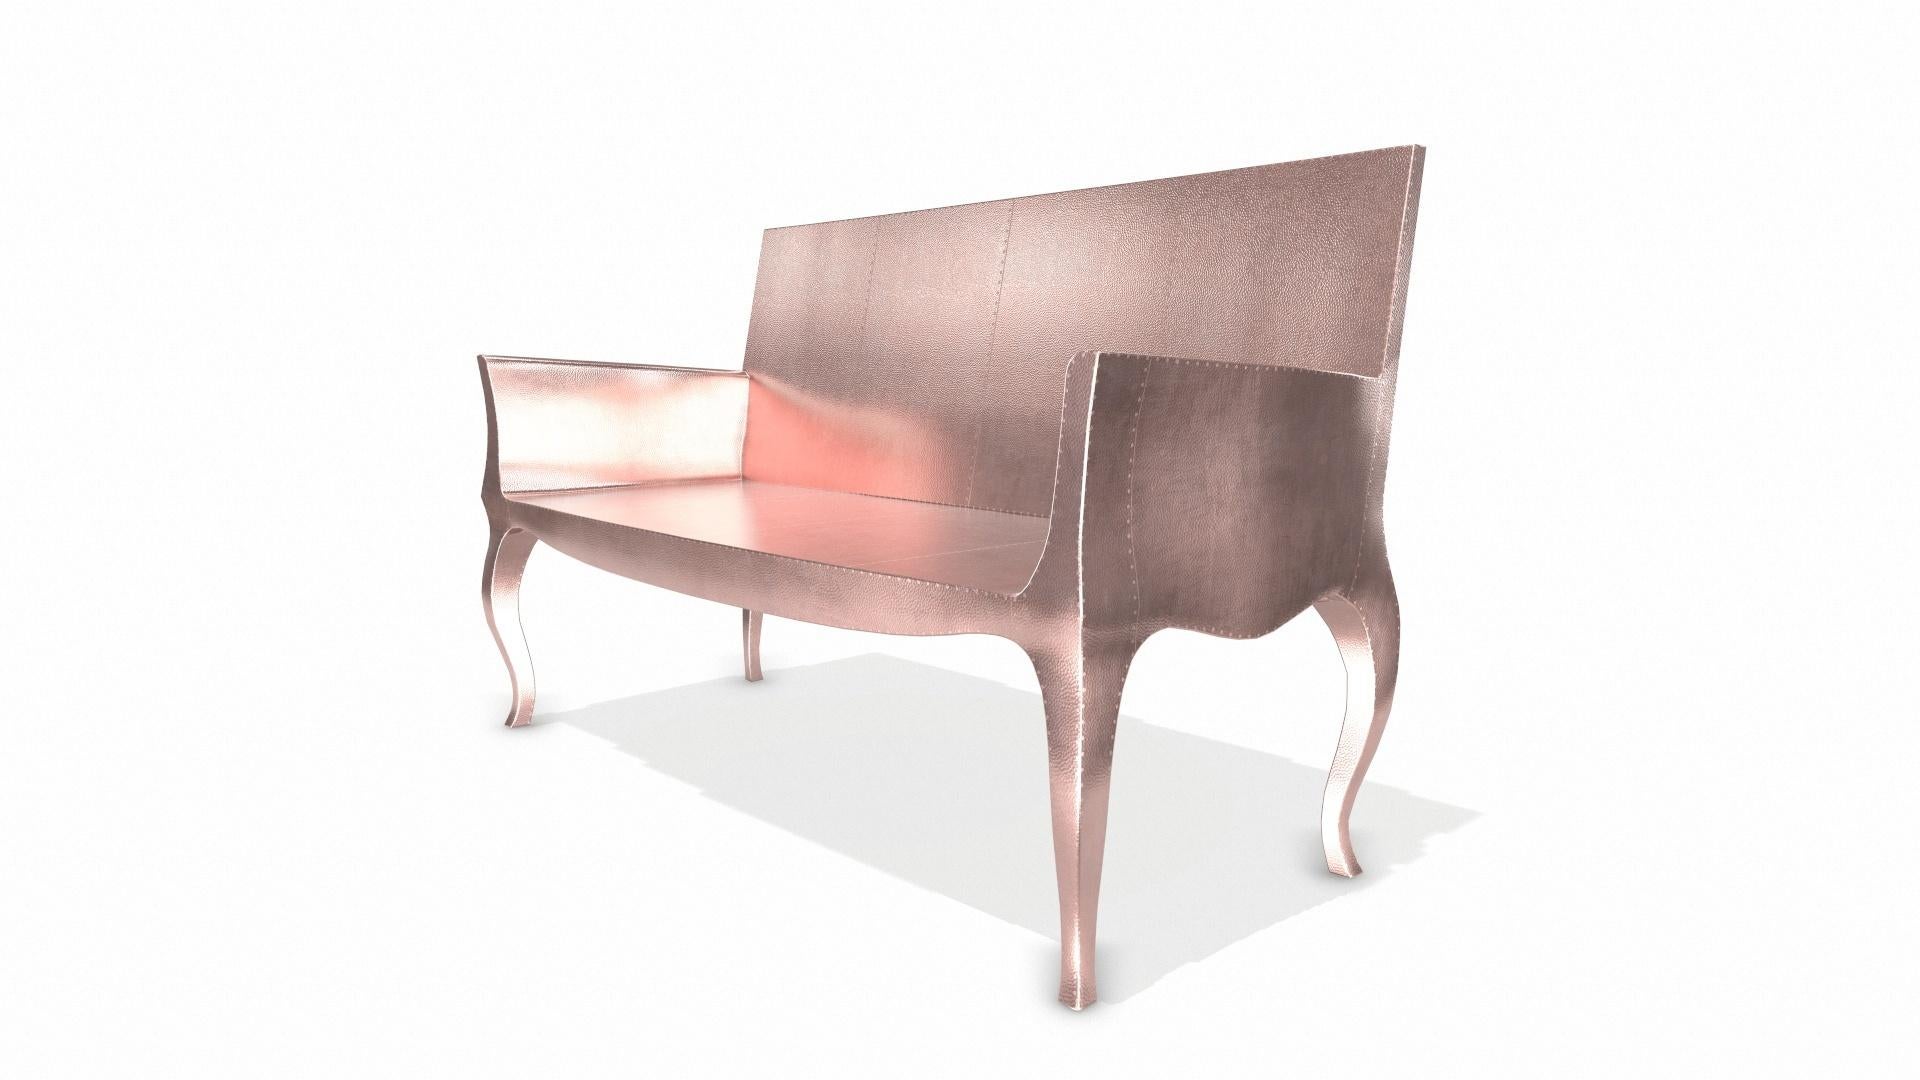 Hand-Crafted Louise Settee Art Deco Benches in Mid. Hammered Copper by Paul Mathieu For Sale